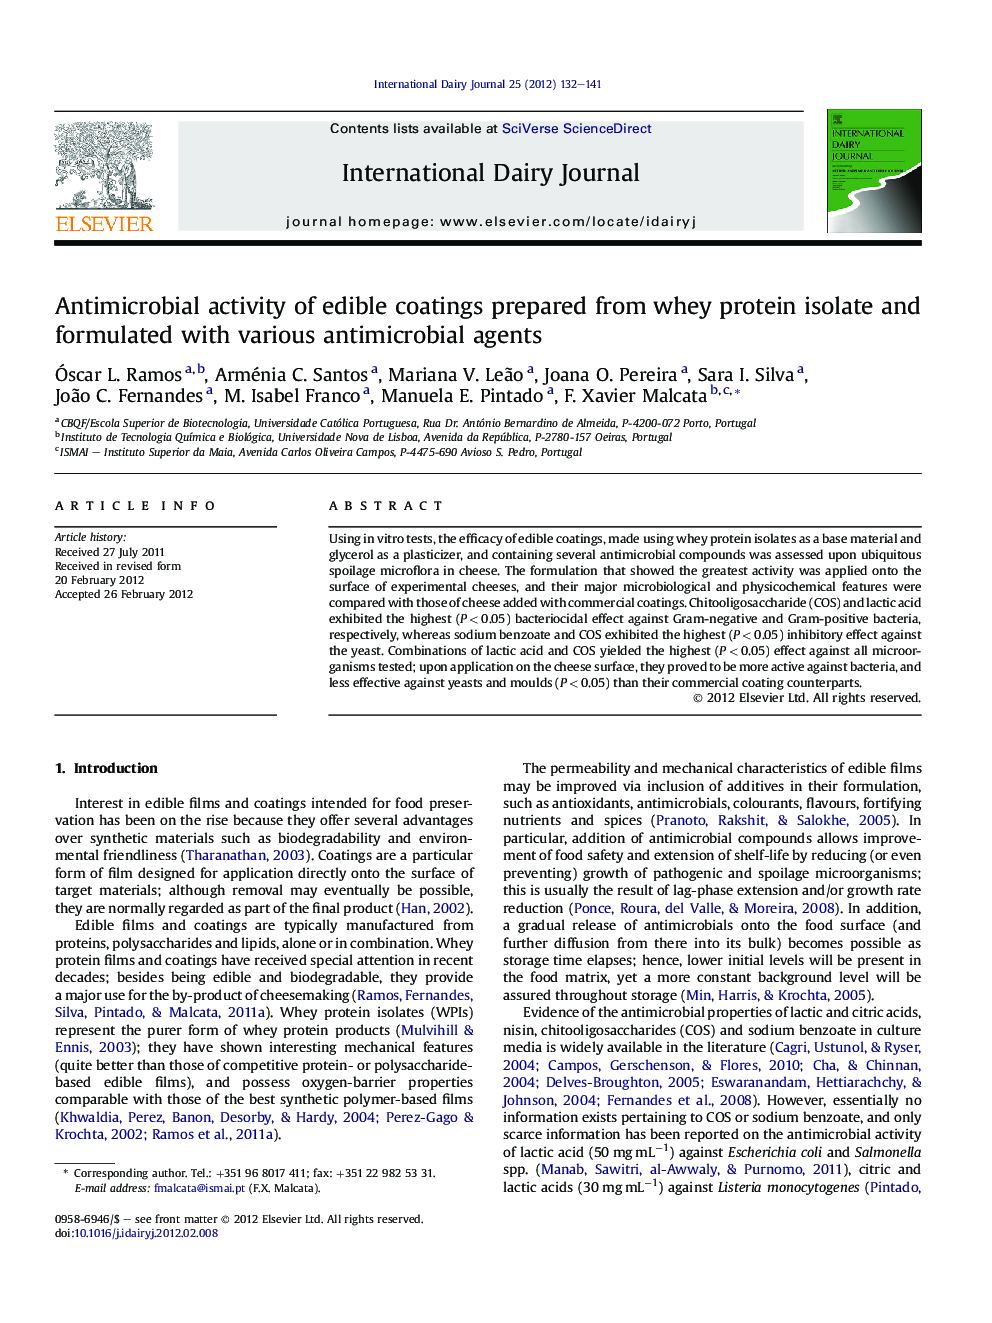 Antimicrobial activity of edible coatings prepared from whey protein isolate and formulated with various antimicrobial agents